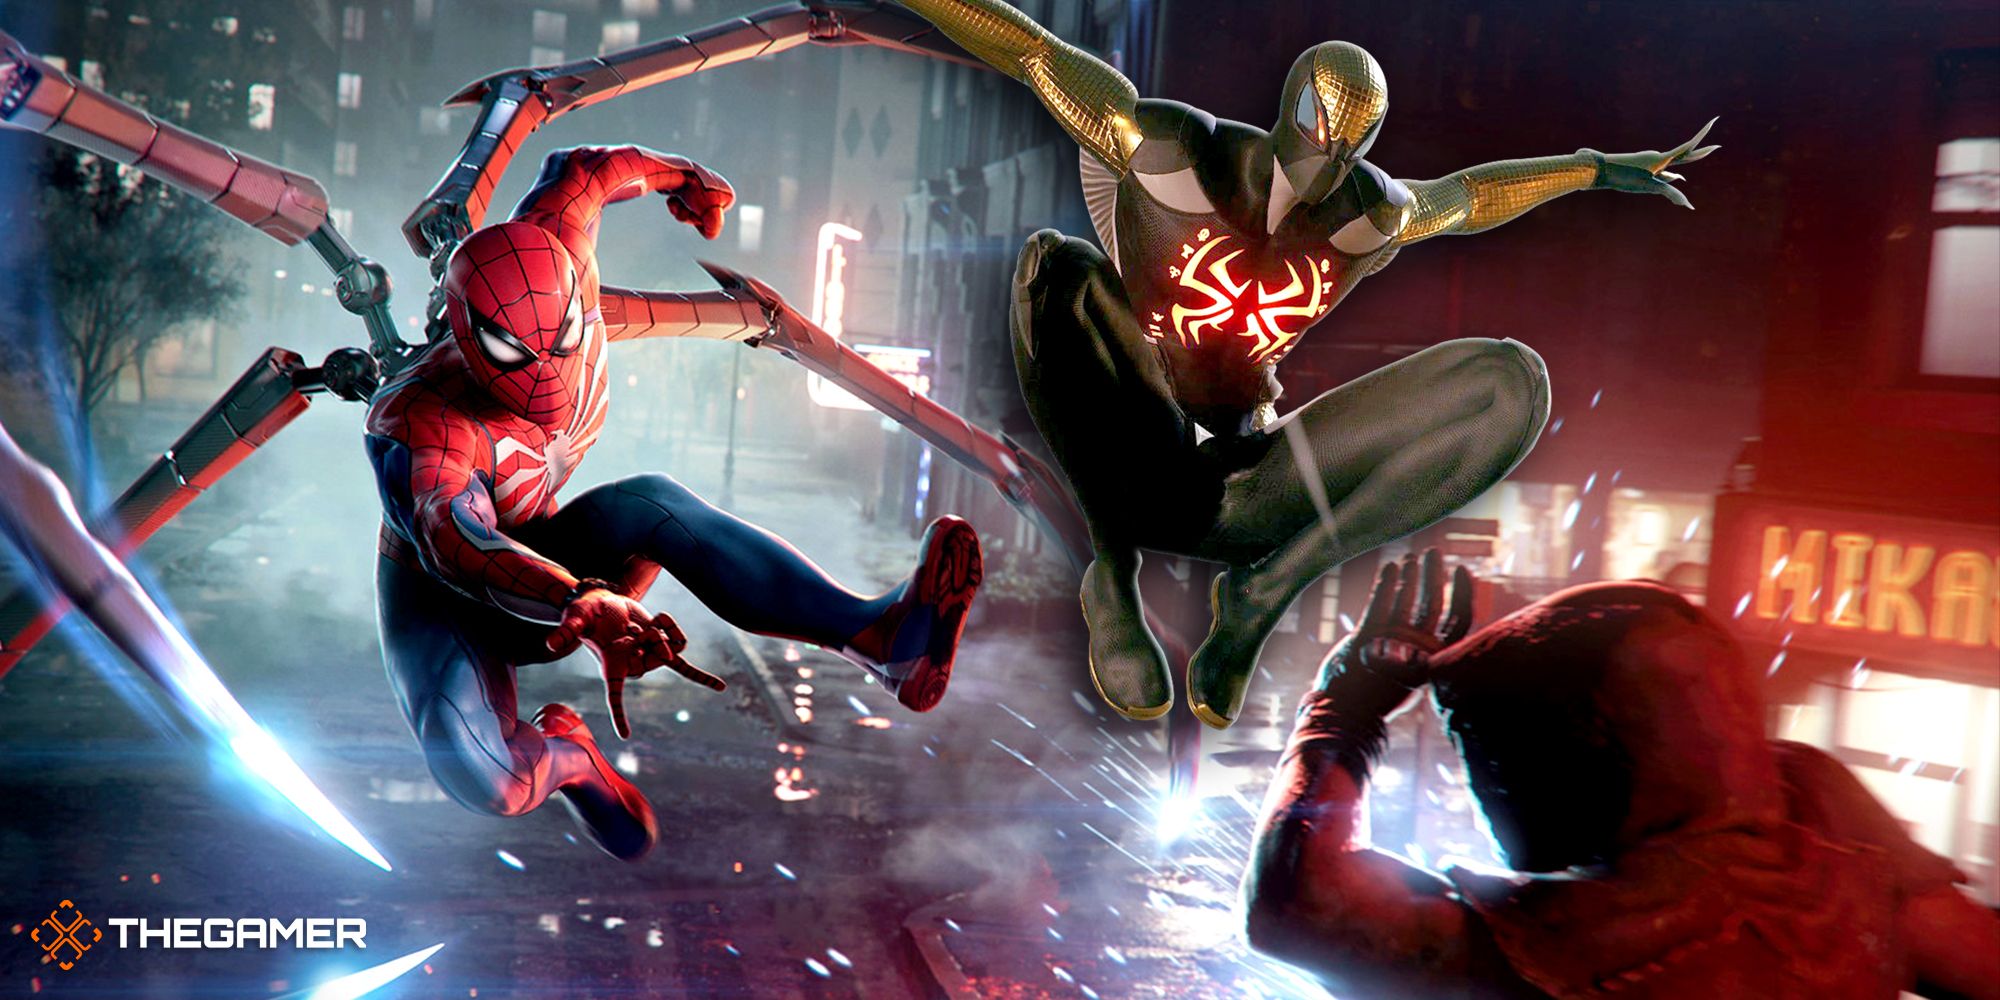 Peter Parker's Spider-Man from Marvel's Spider-Man 2 on the left with robotic limbs extended. Spider-Man from Marvel's Midnight Suns on the right, jumping through the air.